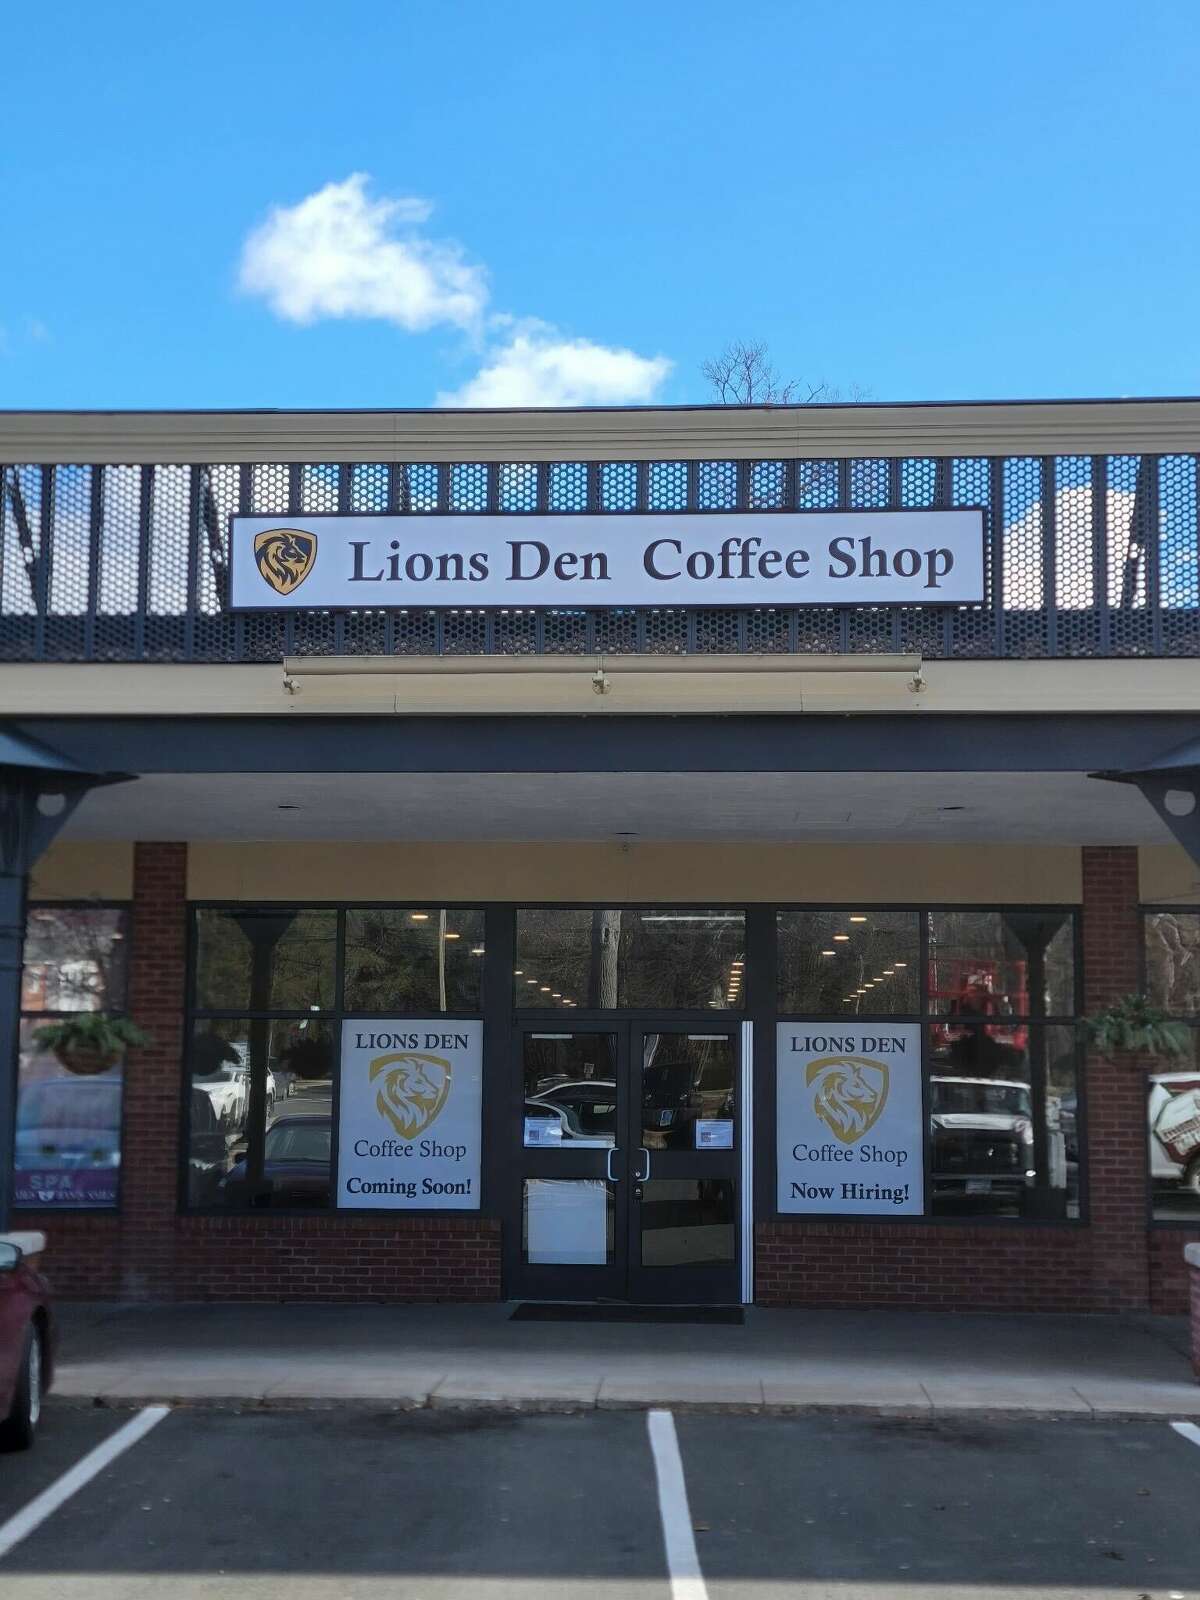 Lions Den Coffee Shop opened its second location in Simsbury, CT January 2023.